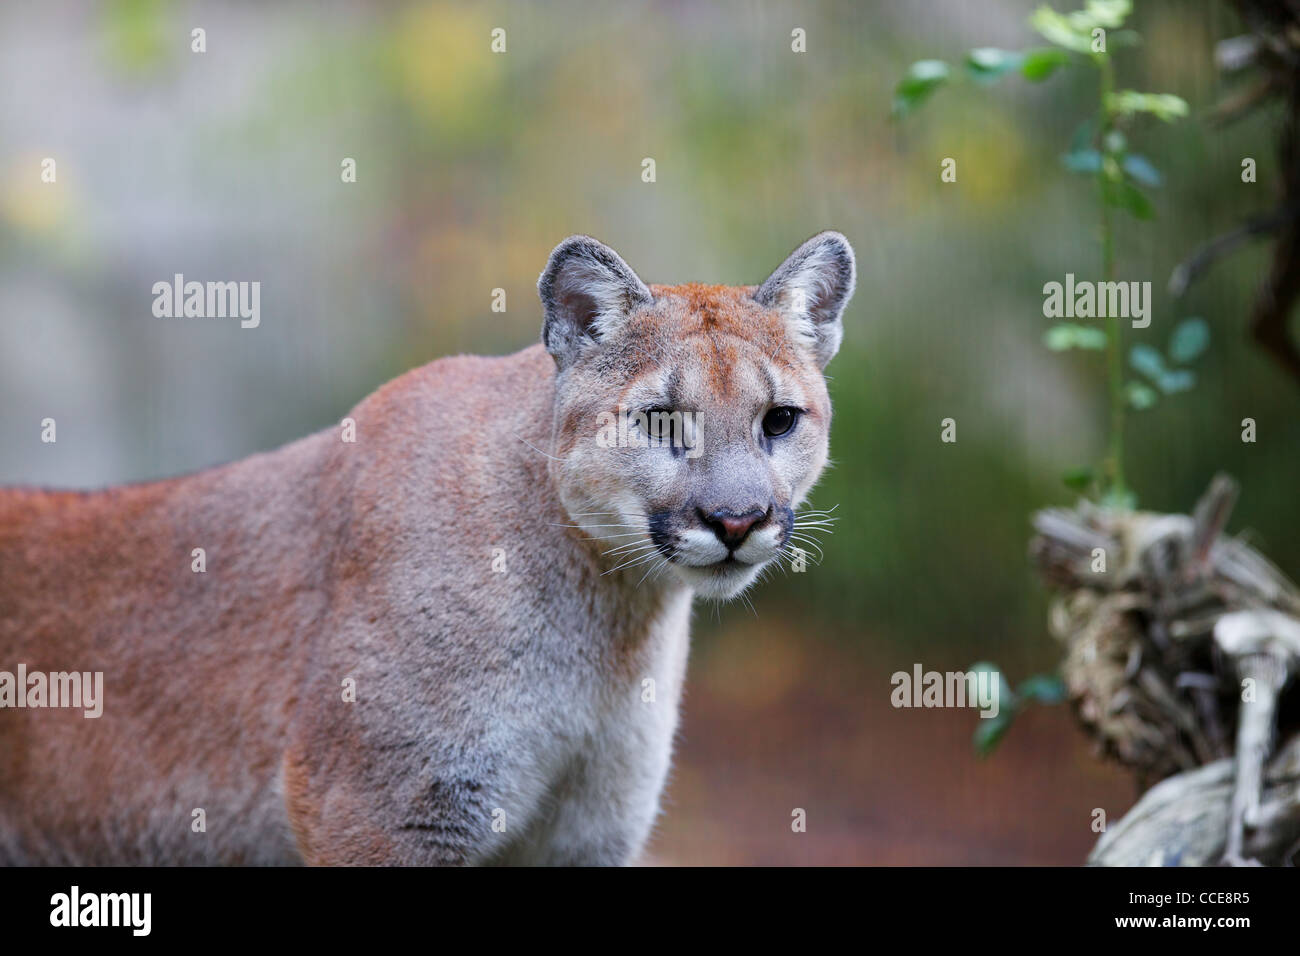 Prowling Mountain Lion or Cougar with soft focus background Stock Photo